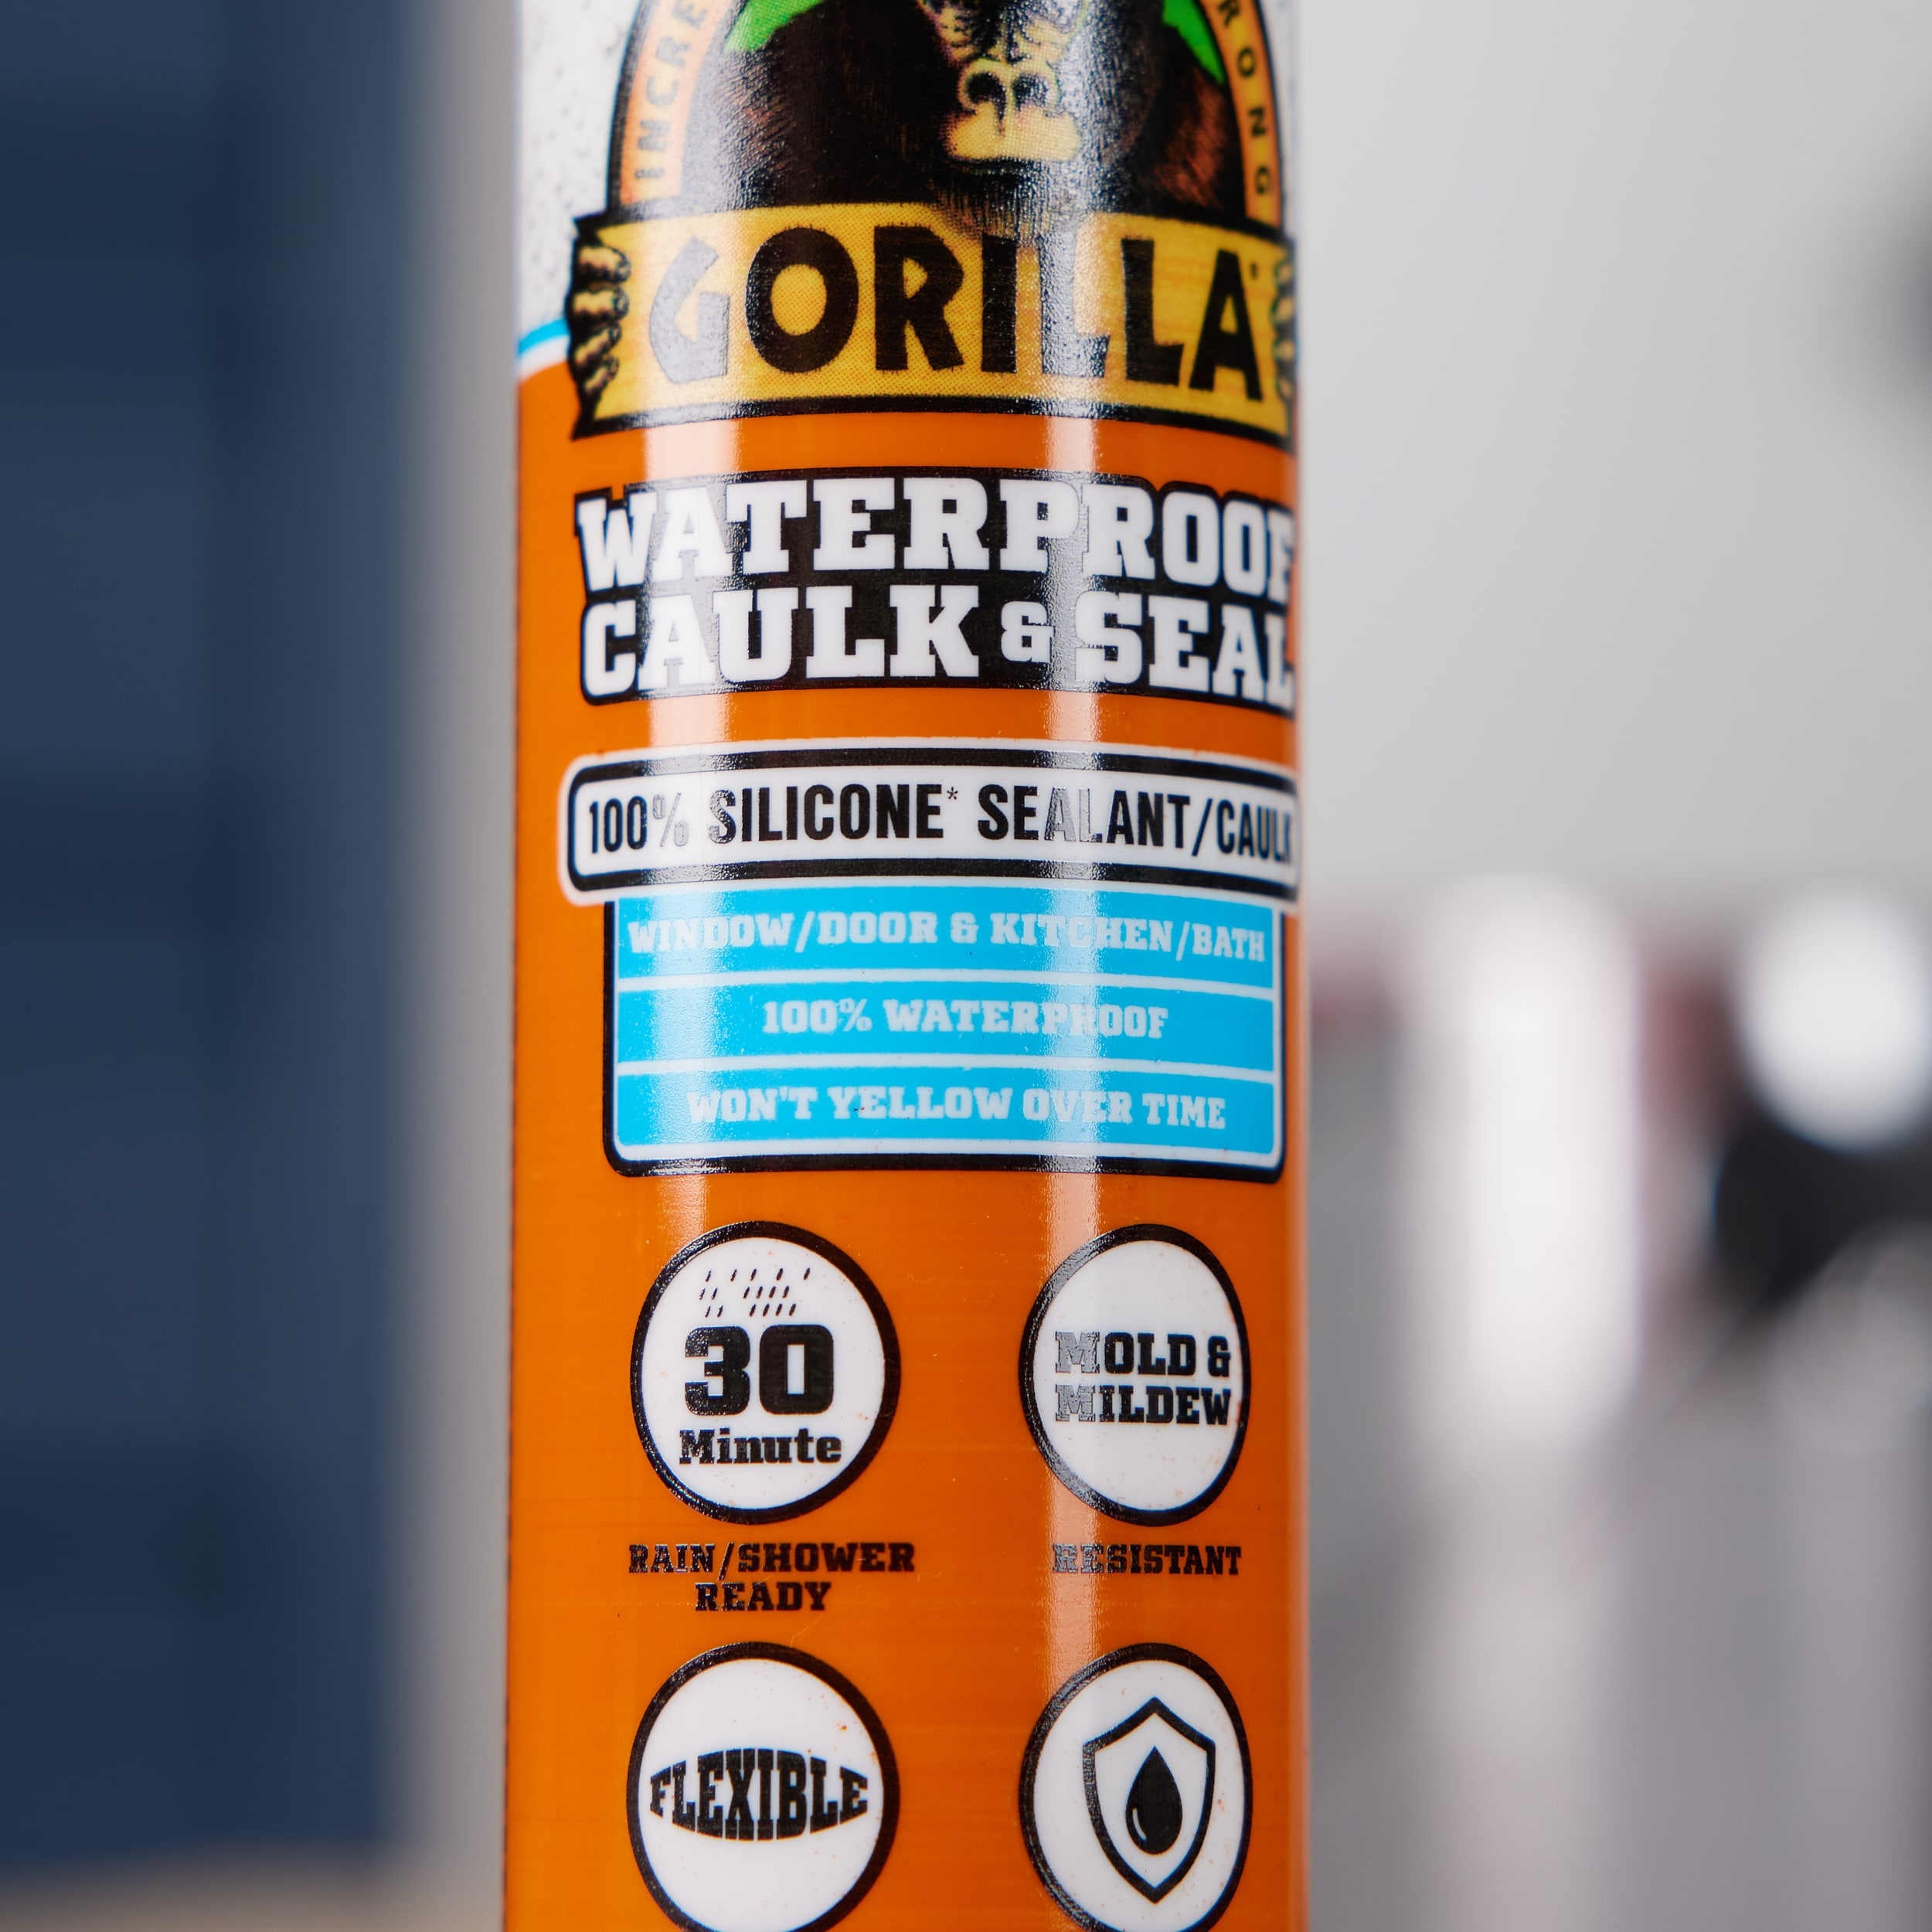 Gorilla Clear 100 Percent Silicone Sealant Caulk, Waterproof and Mold &  Mildew Resistant, 10 Ounce Cartridge, Clear, (Pack of 1) : :  Industrial & Scientific